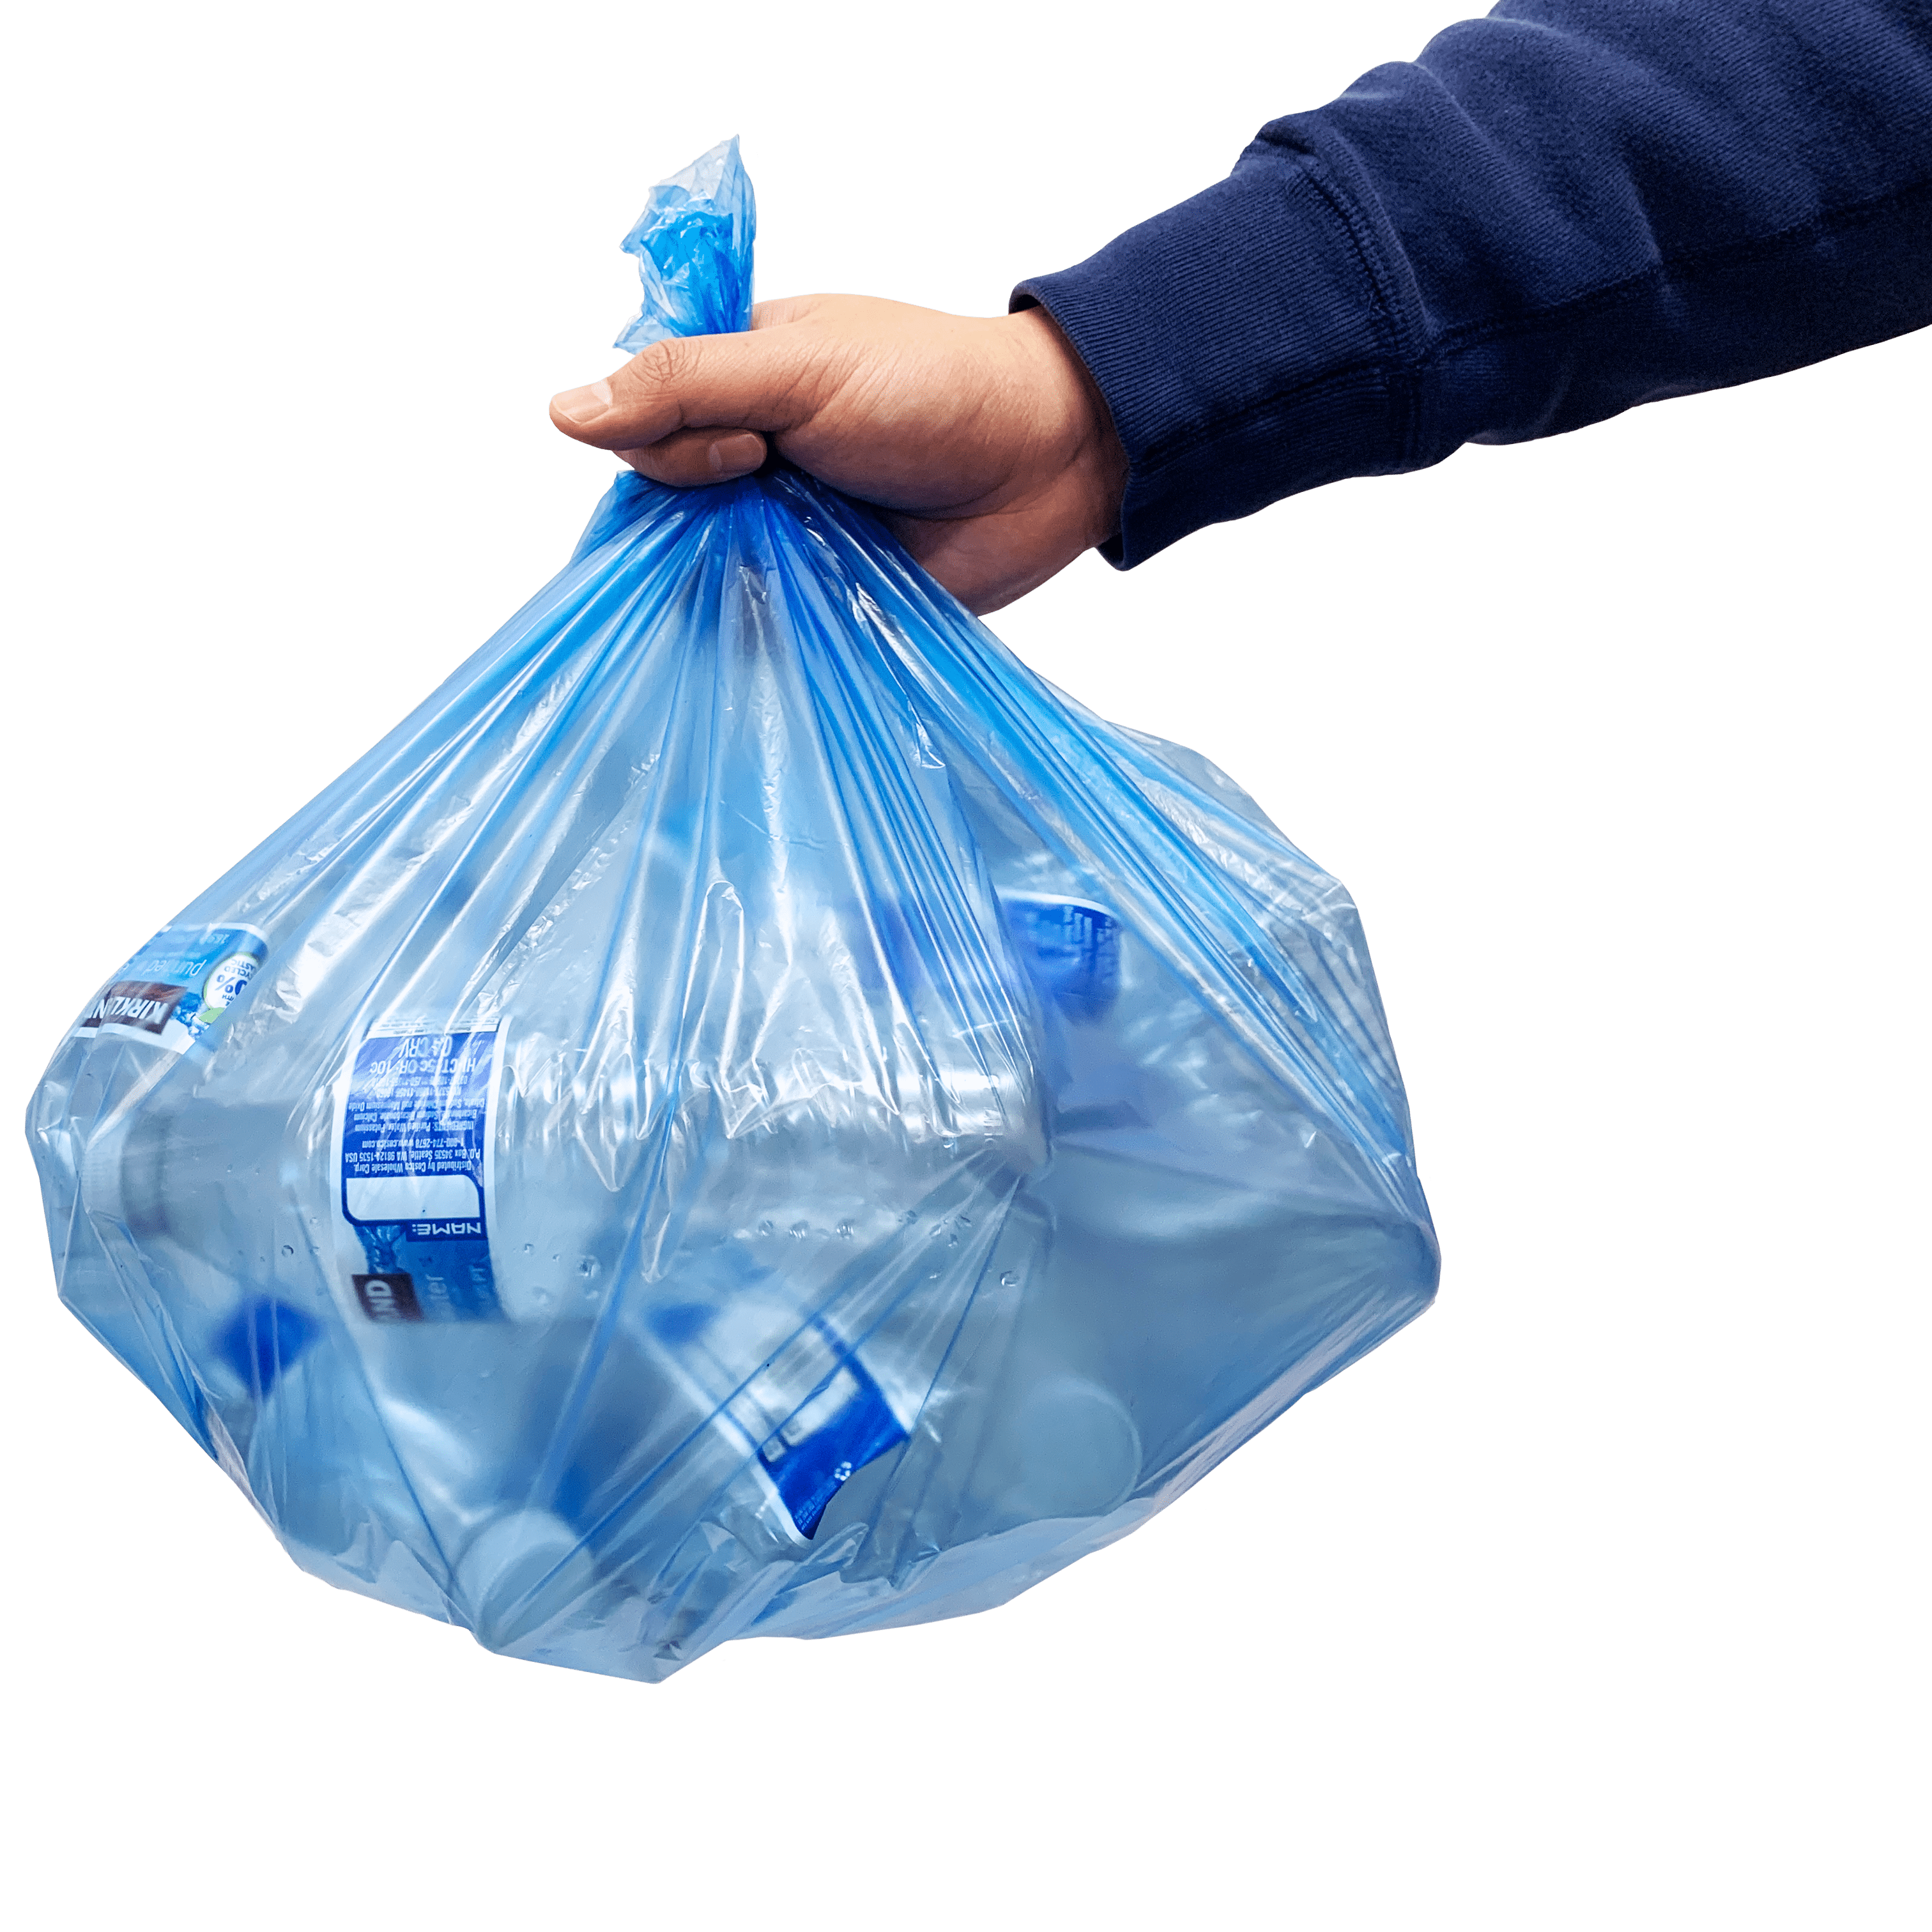 Husky Frost Blue 4-Gallon Trash Bags, 60-Count